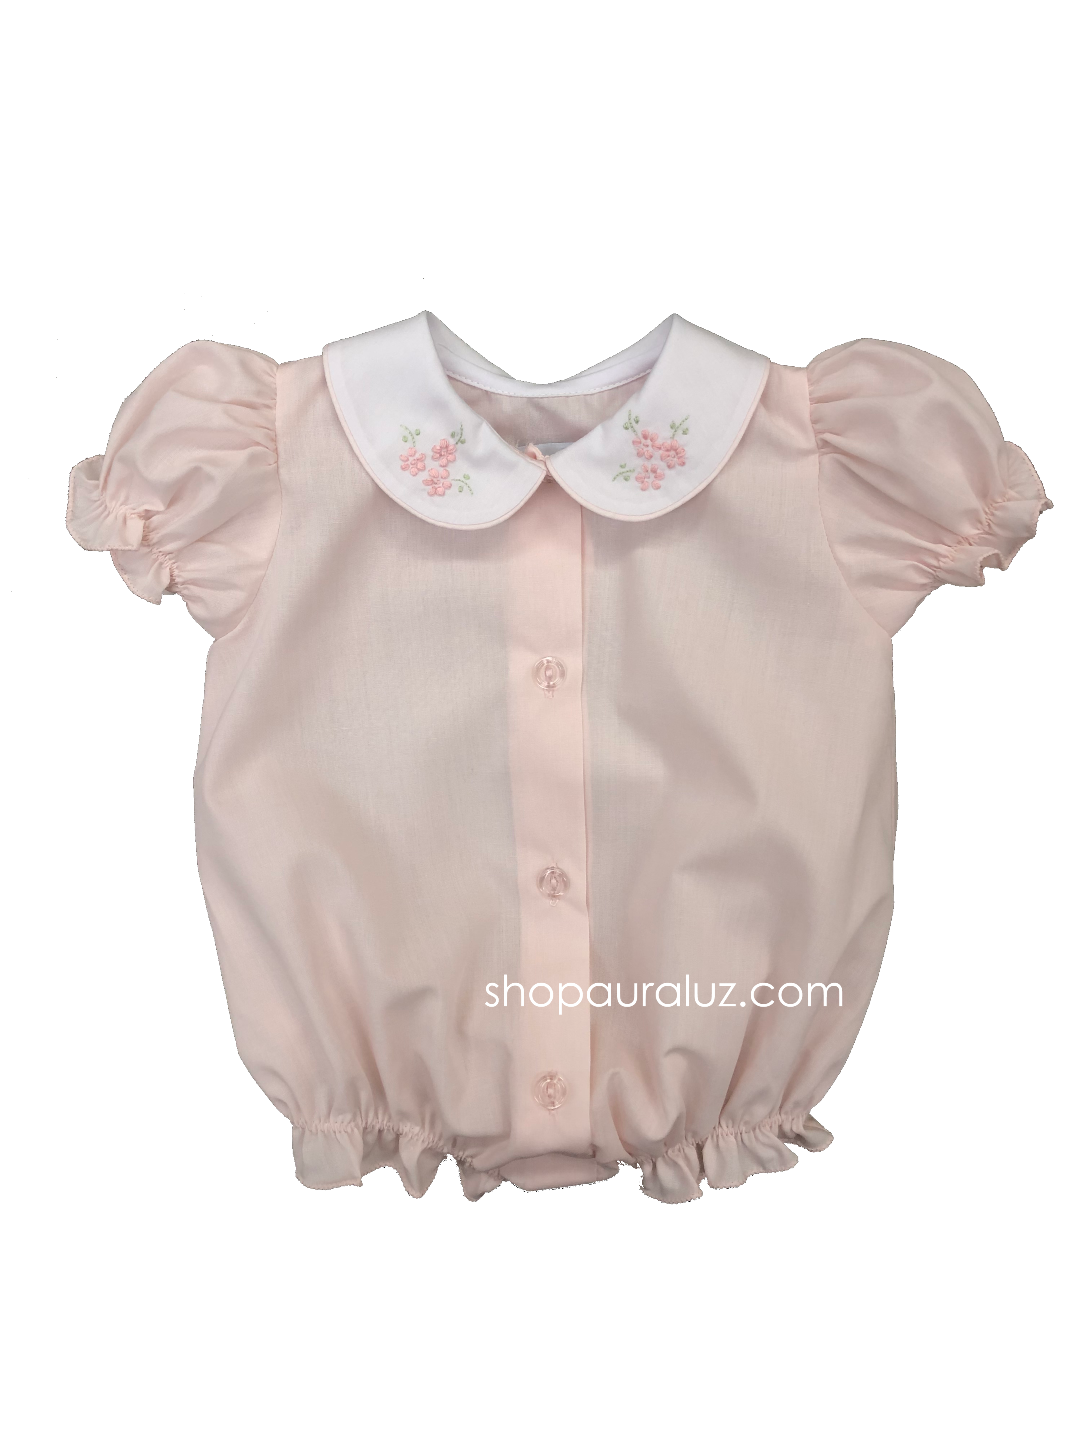 Auraluz Girl Bubble/Button-Front..Pink w/binding trim, white p.p. collar and embroidered flowers